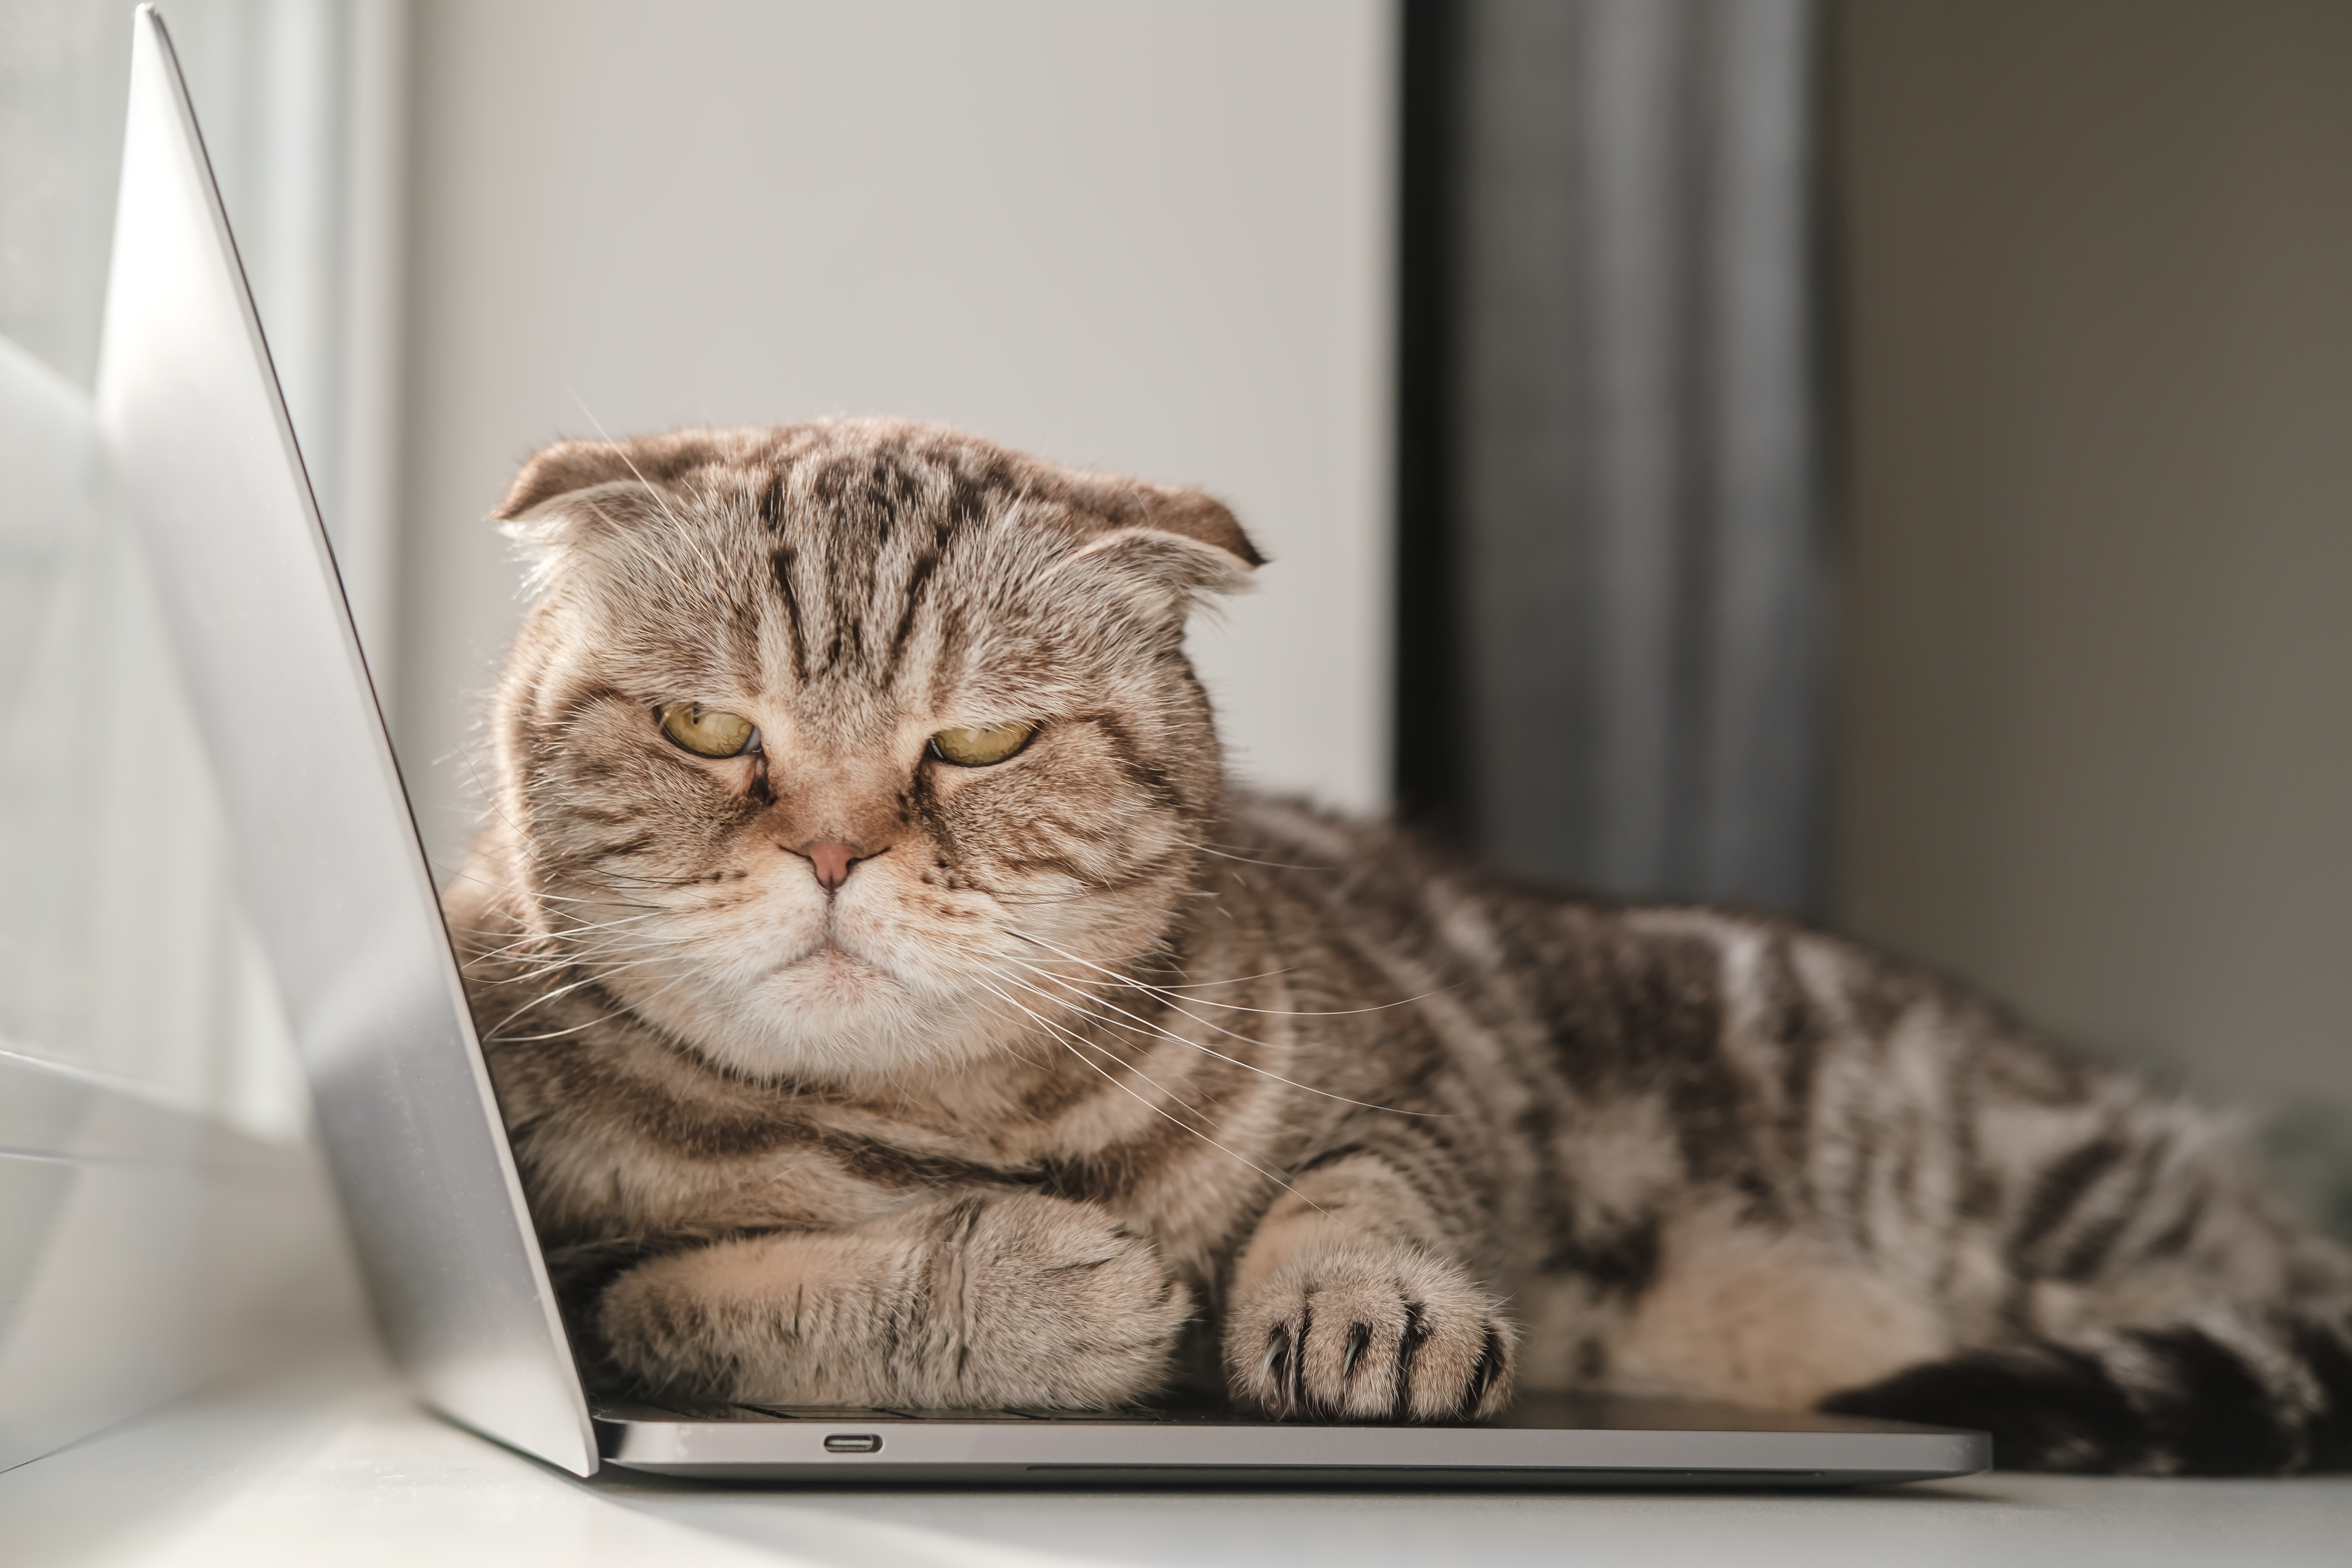 A cat sitting on a laptop while someone works remotely.